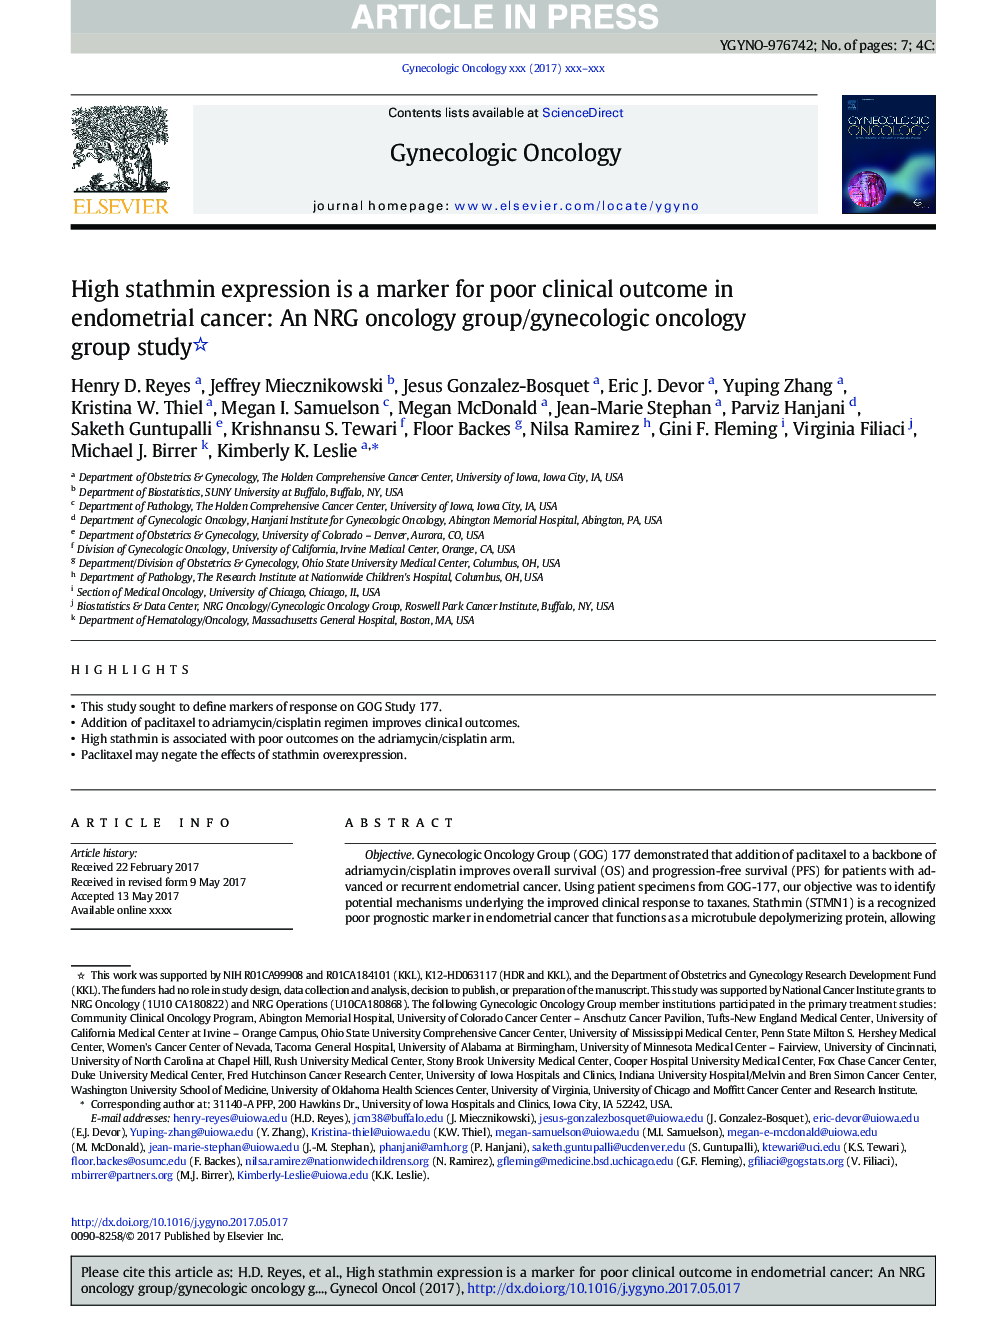 High stathmin expression is a marker for poor clinical outcome in endometrial cancer: An NRG oncology group/gynecologic oncology group study